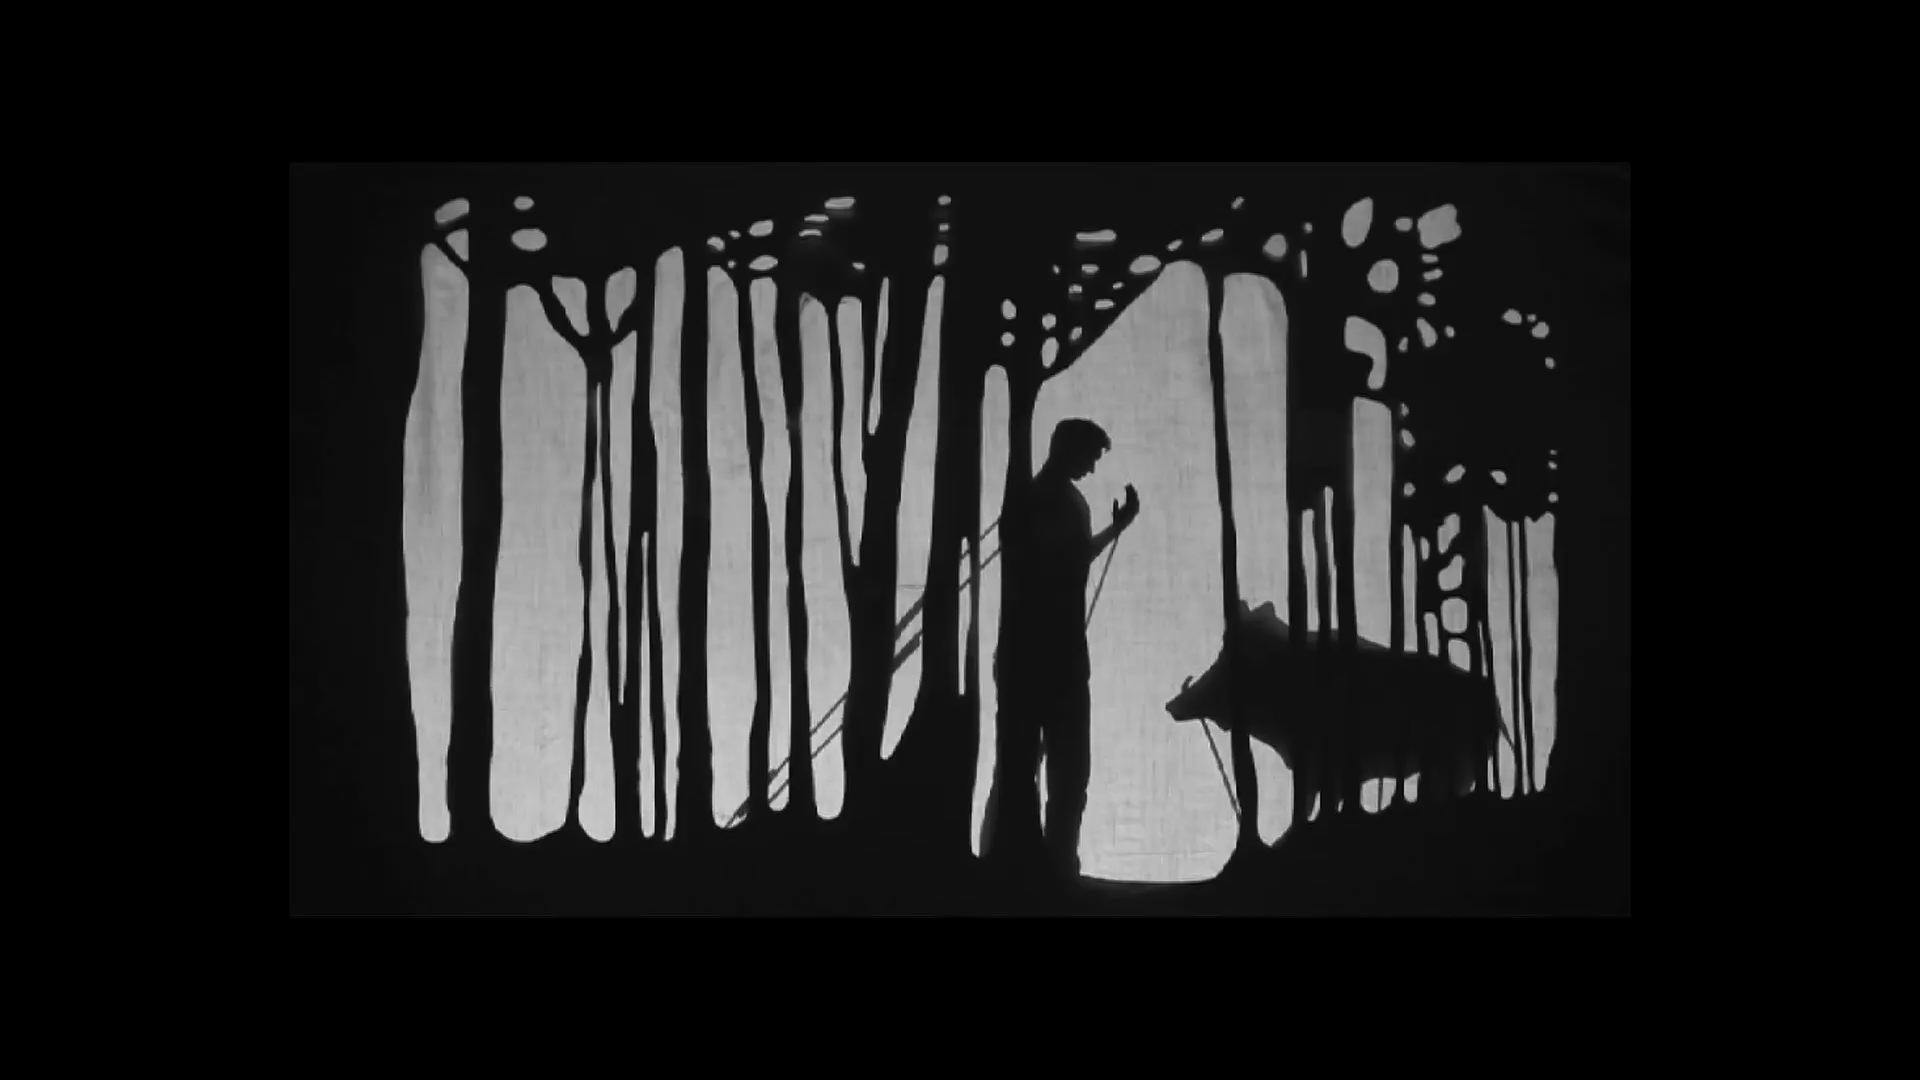 Image still from a video of shadow puppets. A figure of a man stands before a wild boar in a forest, their arm raised as if in conversation with the boar.